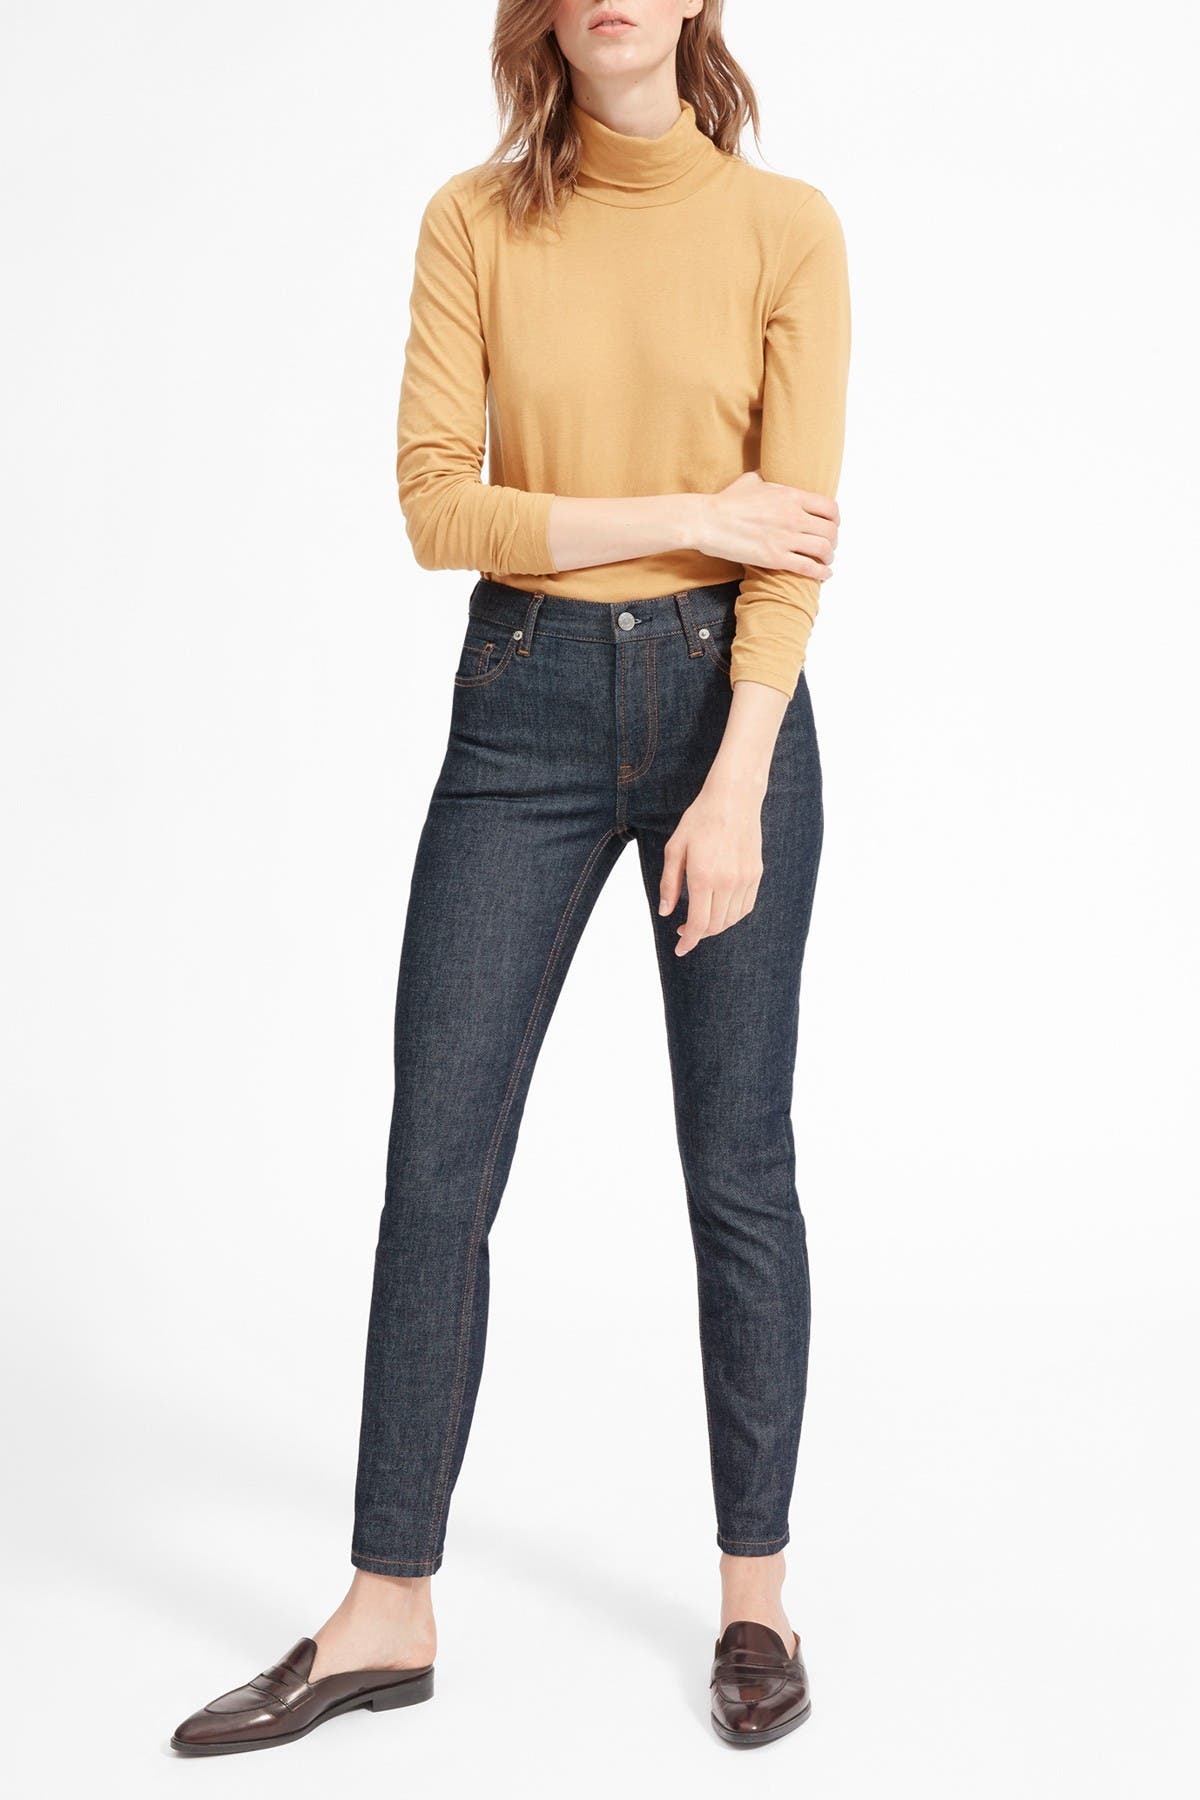 low rise tight jeans